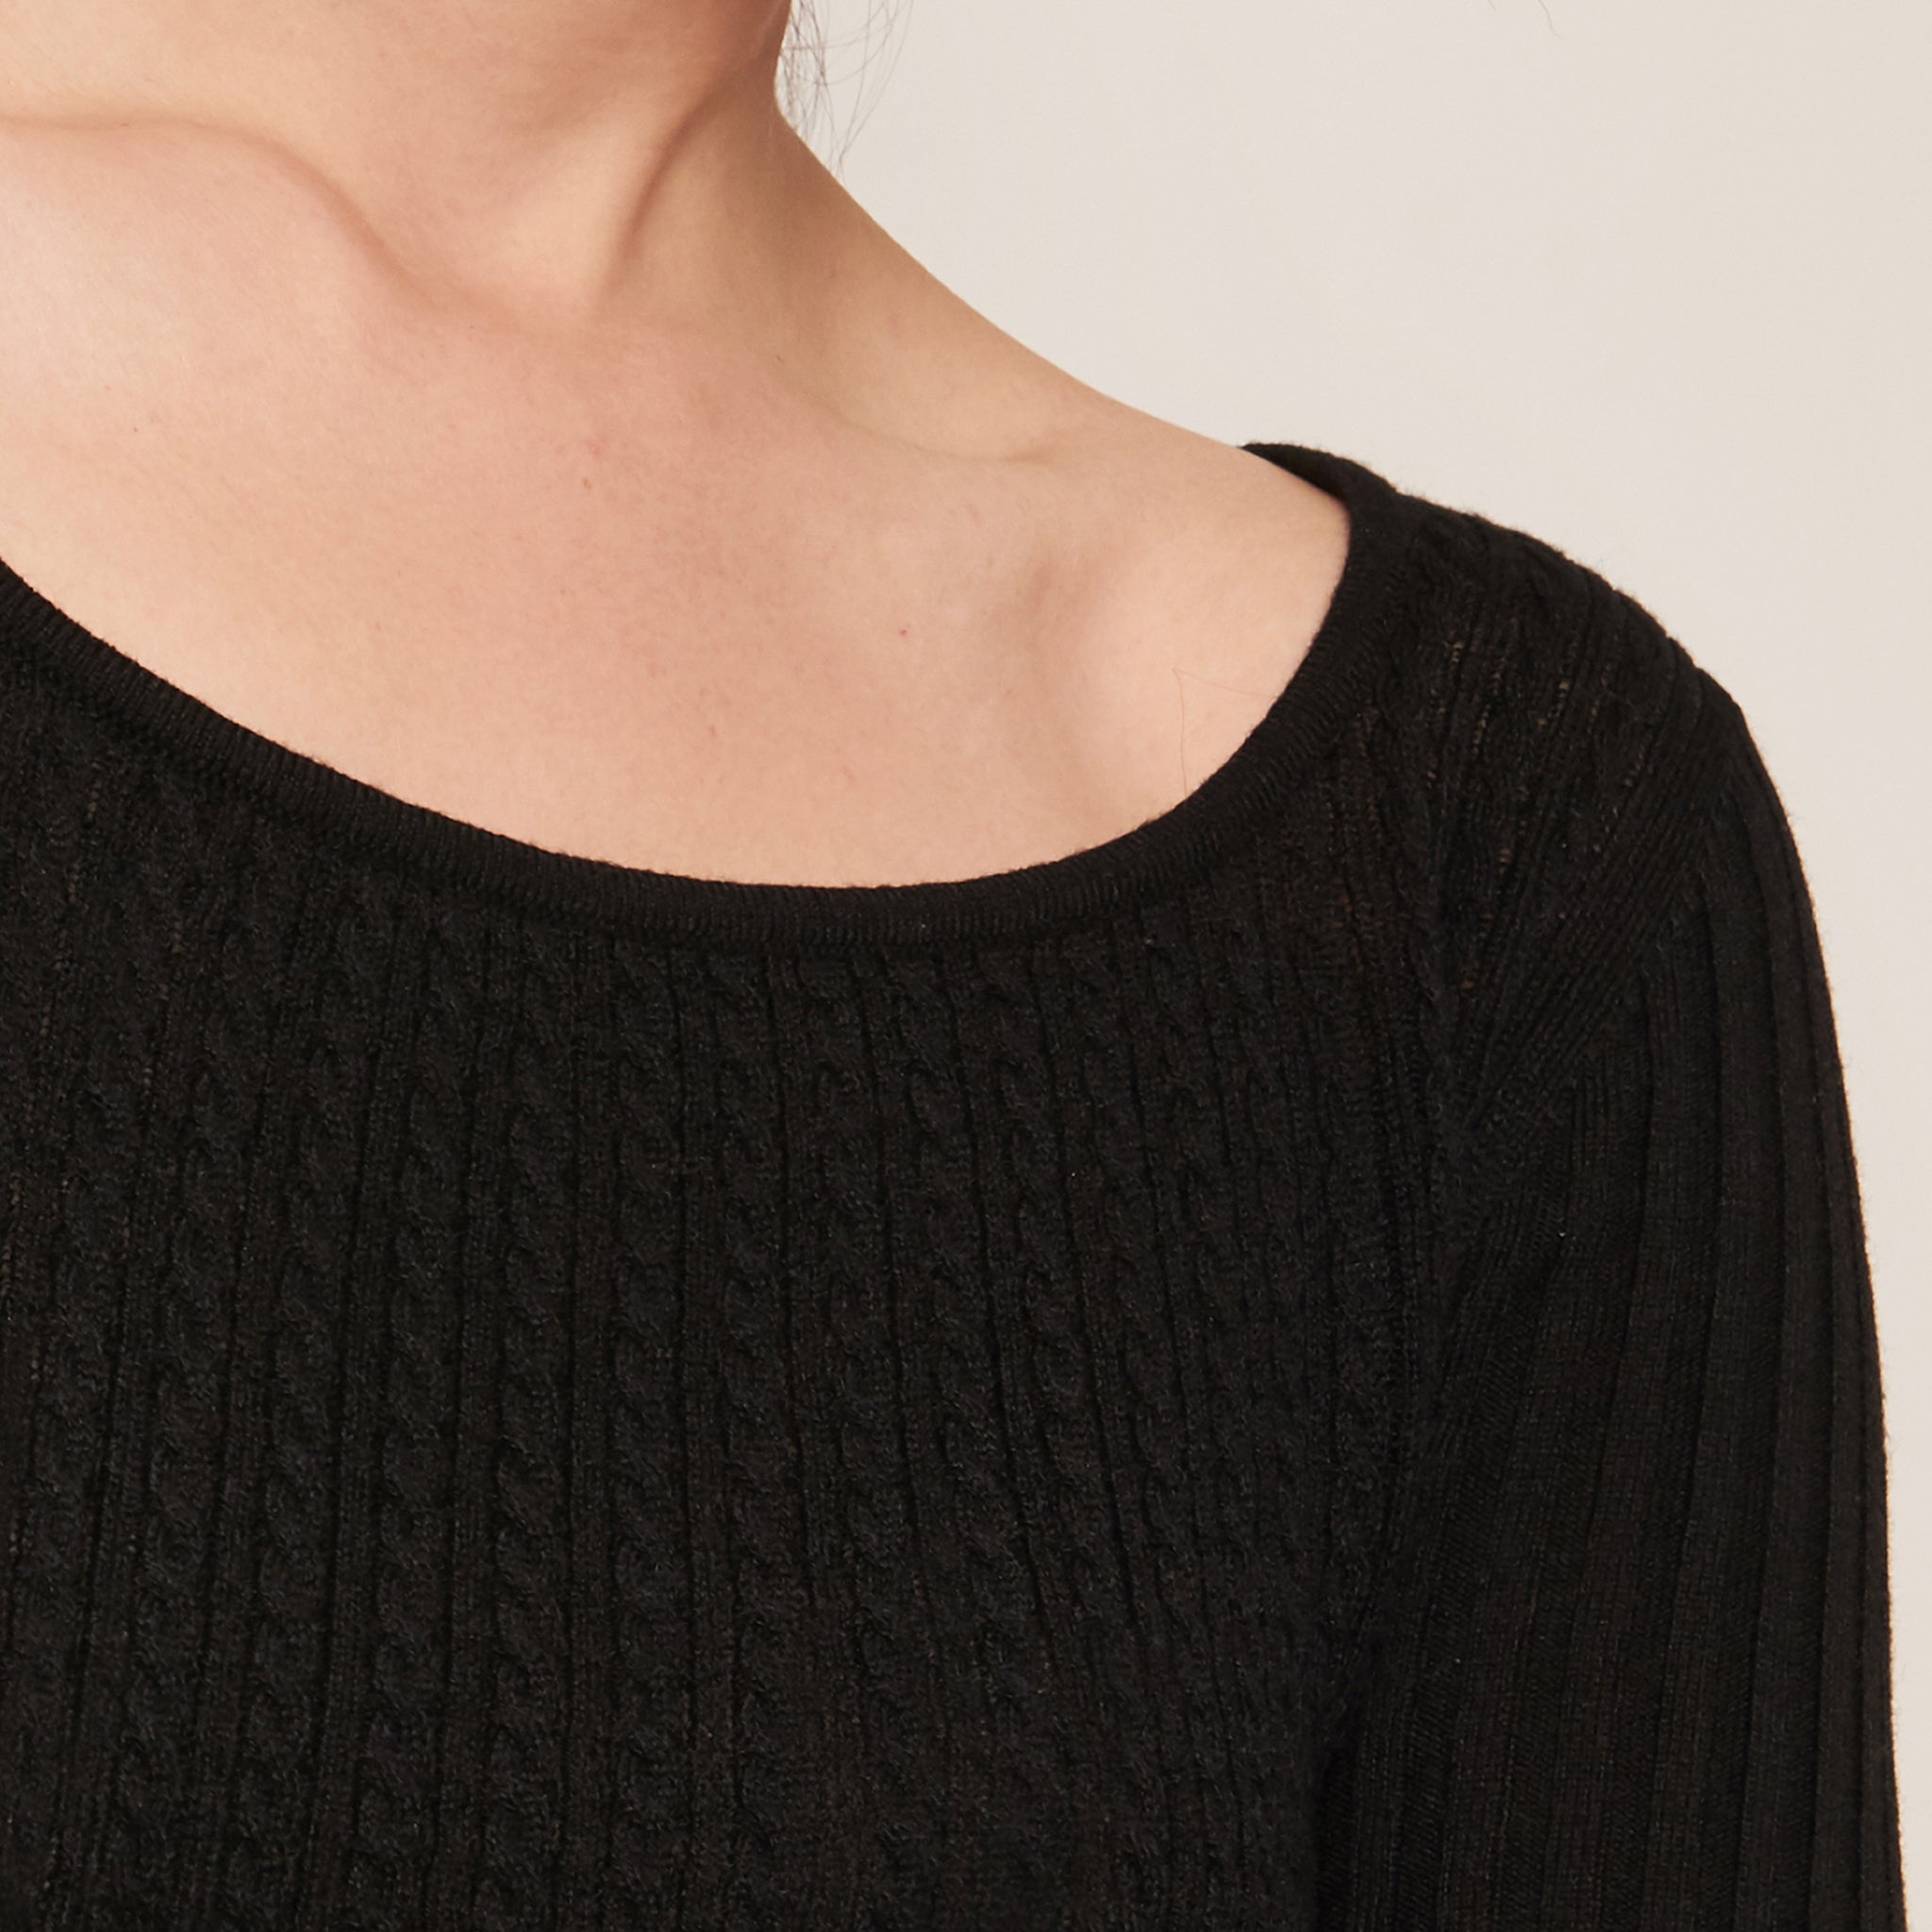 hello ronron Malaysia womenswear knitwear brand Agnes Top | Scoop neck cable knit top